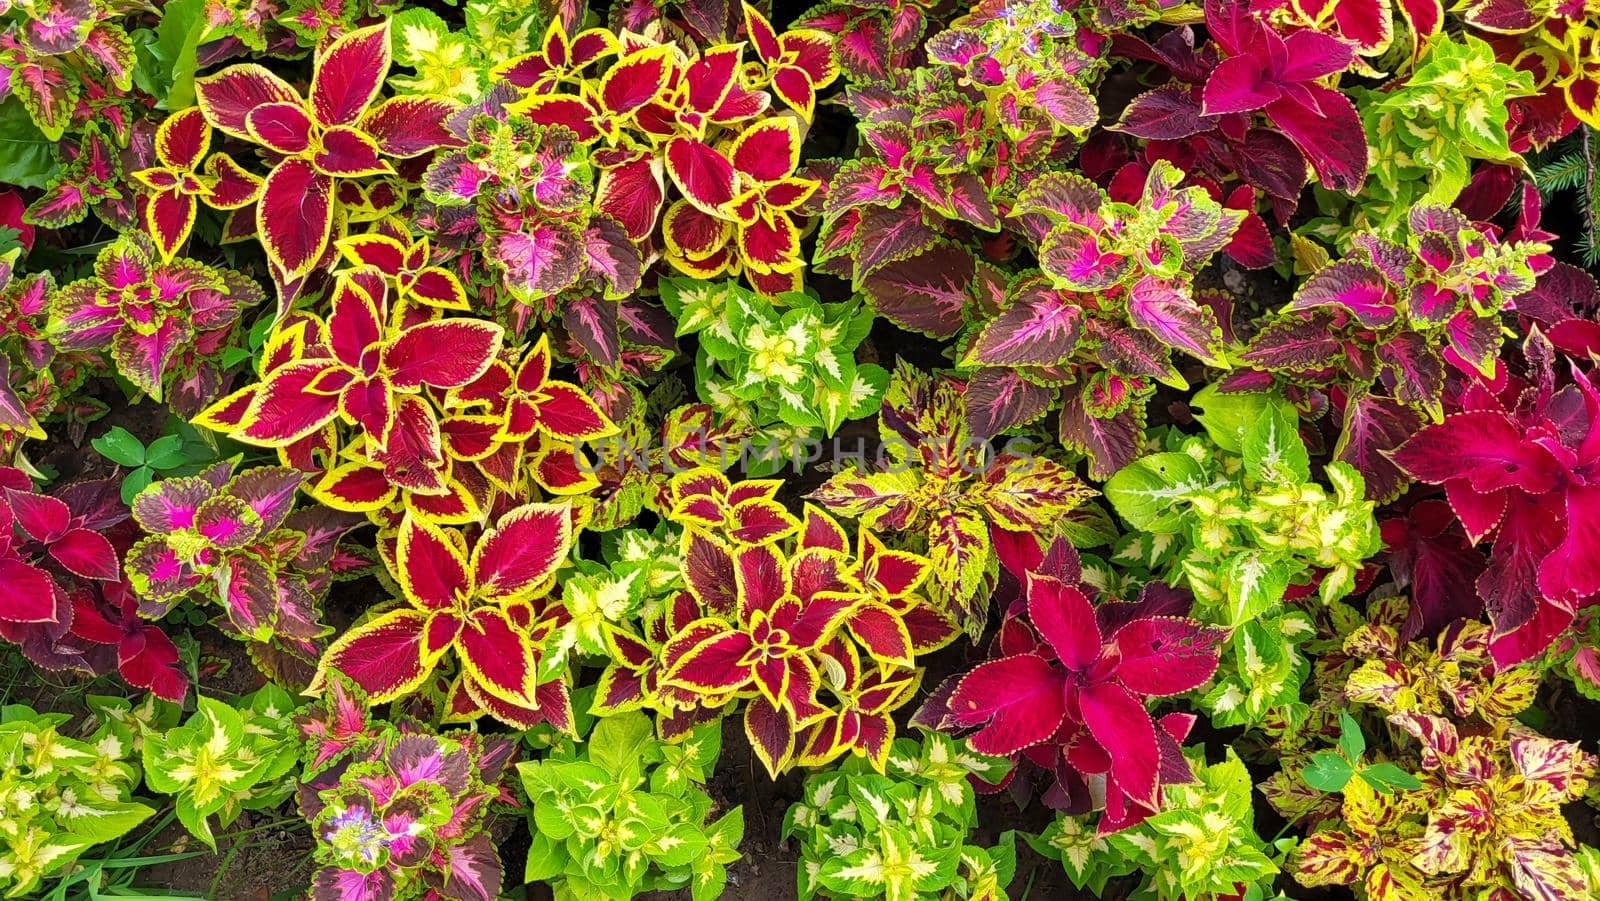 Large beautiful leaves of coleus multicolored bright sunny day.